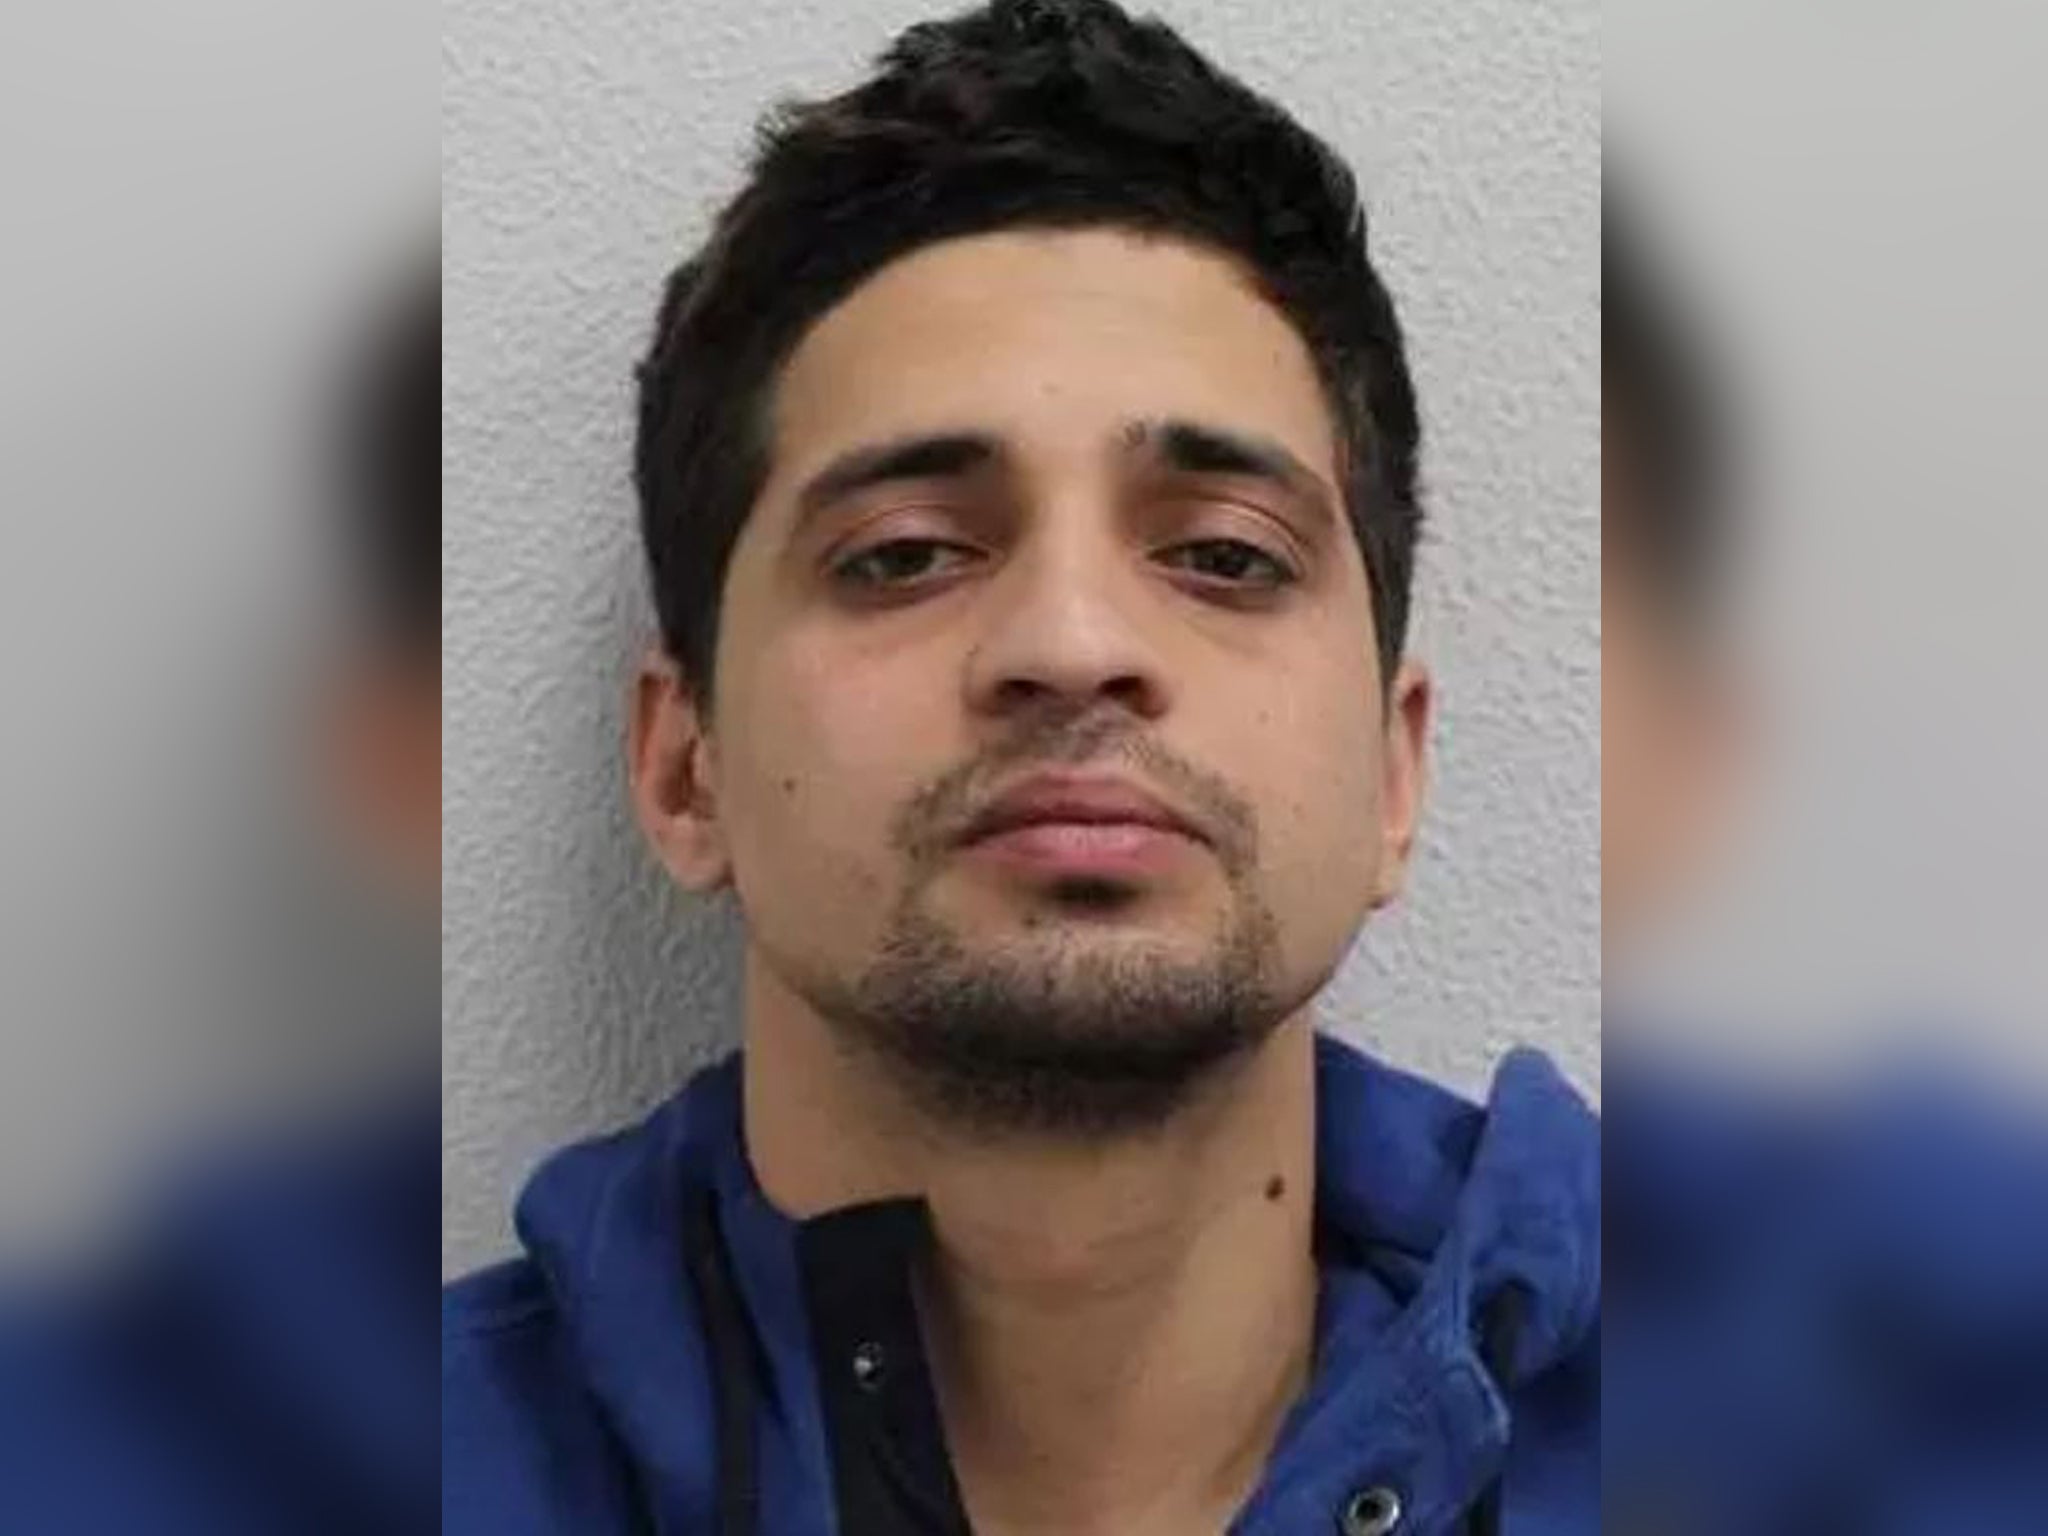 Rehan Khan, who police are hunting over the stabbing of an 11-month-old baby